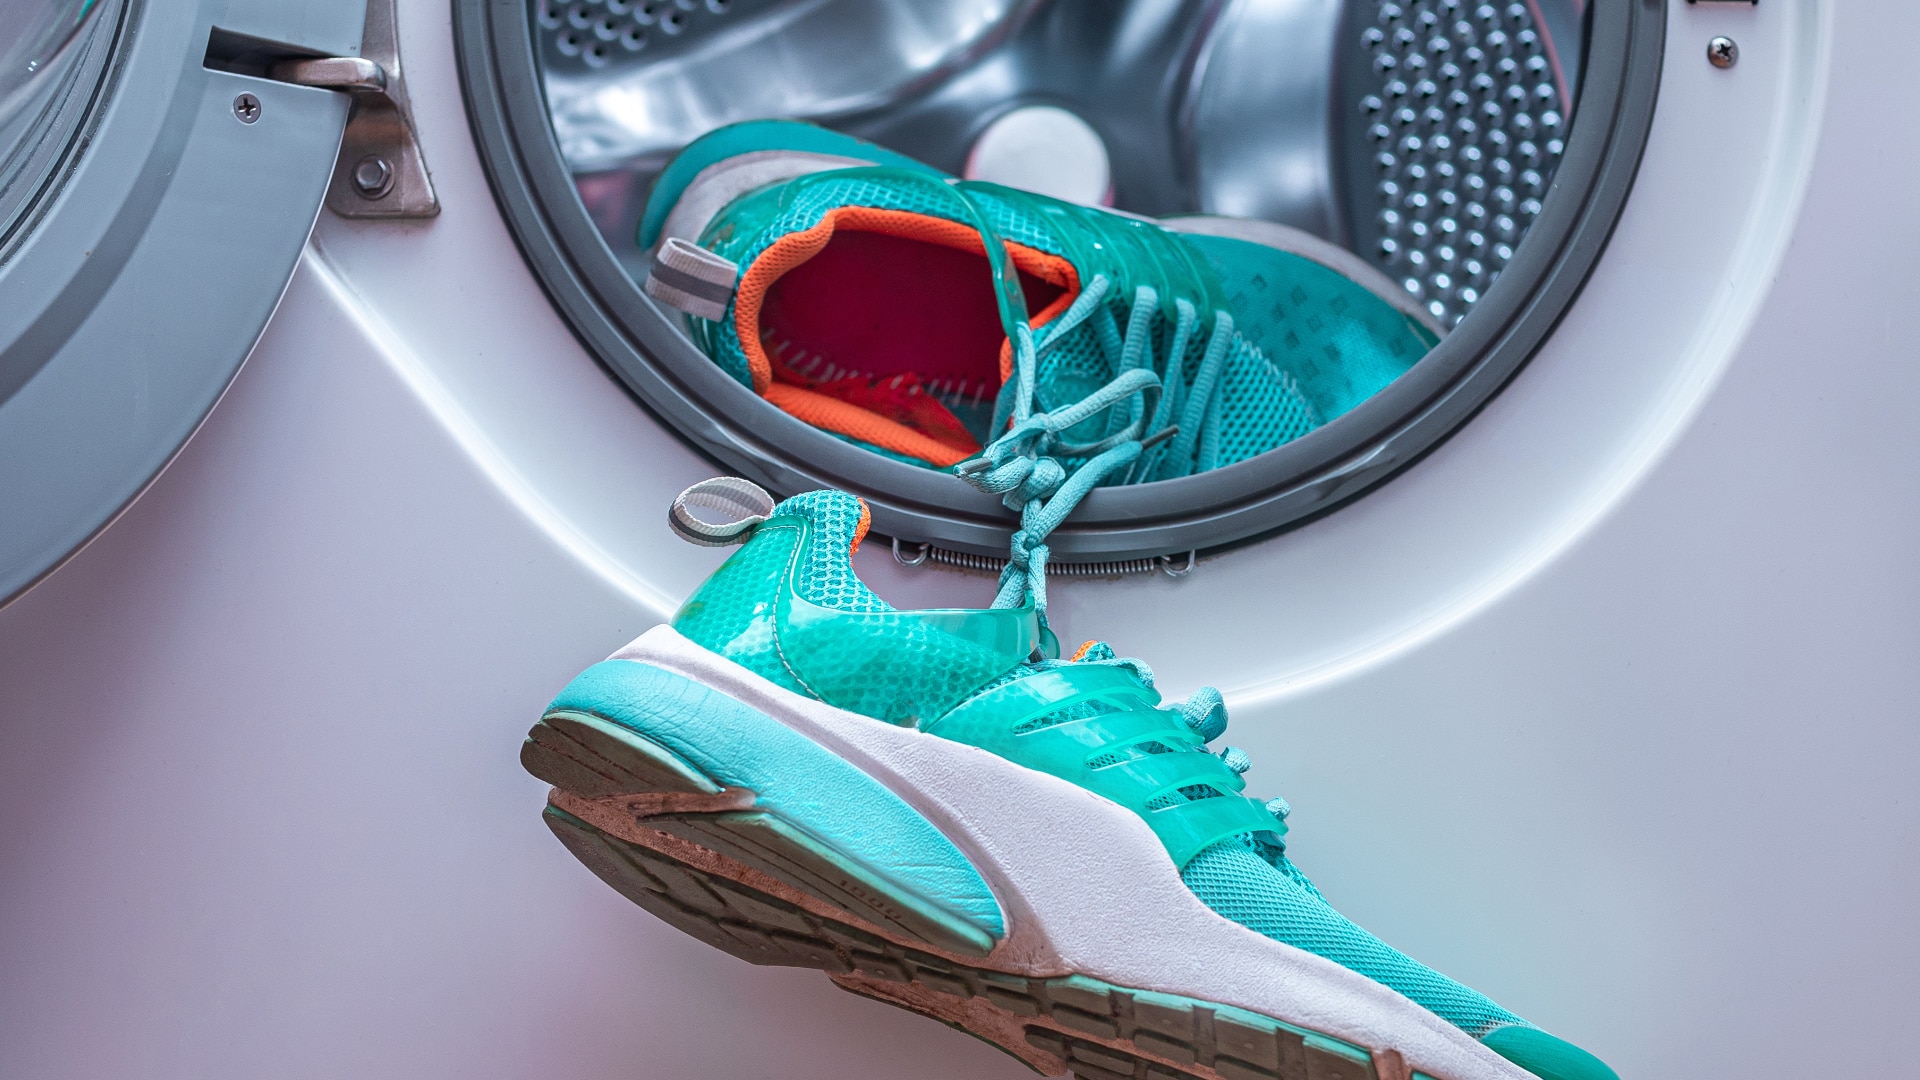 Featured image for “How To Wash Shoes in The Washing Machine”